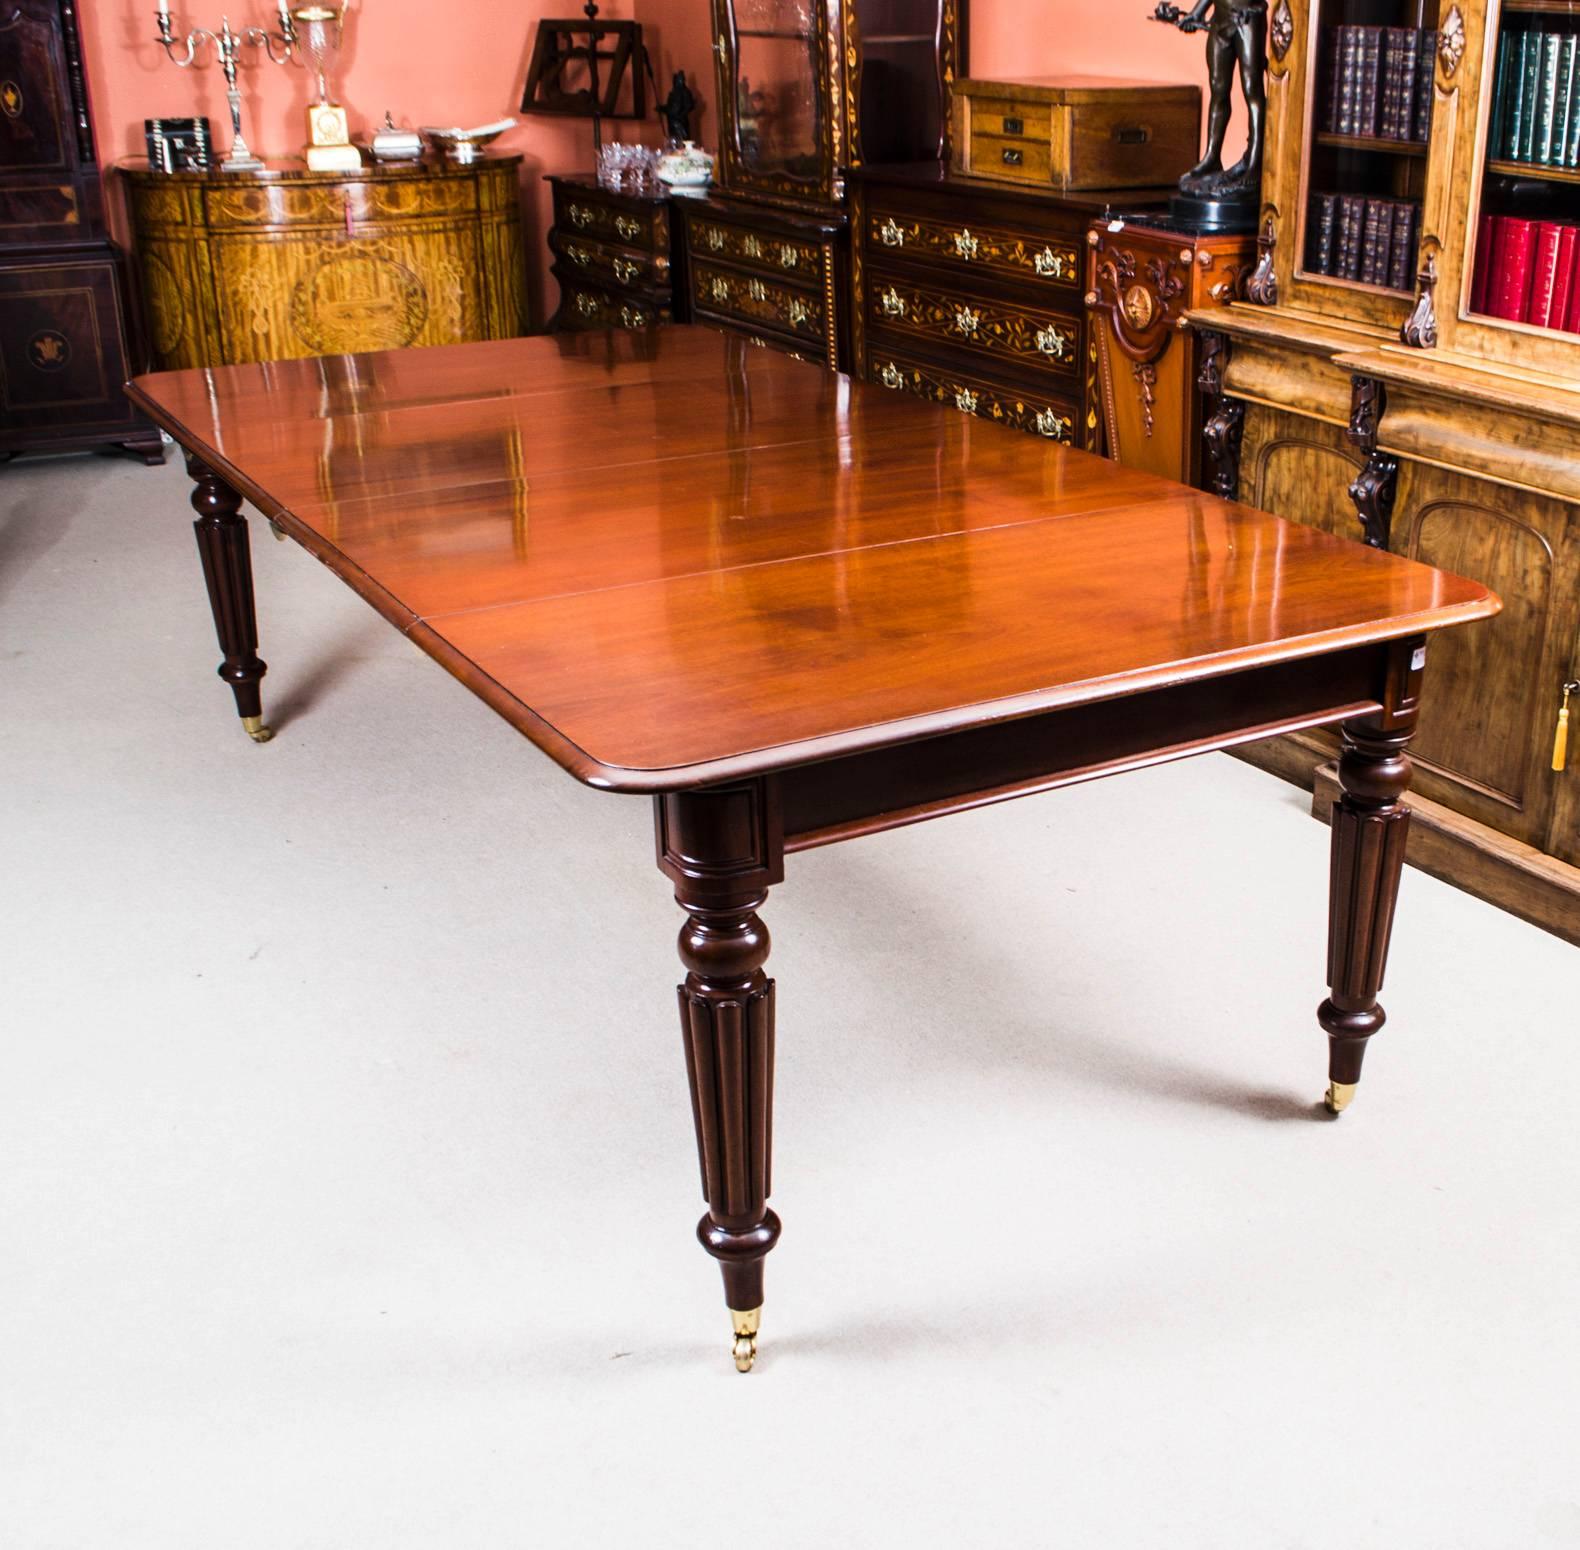 A very rare opportunity to own an antique English Regency dining table in the manner of Gillow’s, circa 1820 in date.

The amazing table has two original leaves and has been handcrafted from solid flame mahogany which has a beautiful grain. The